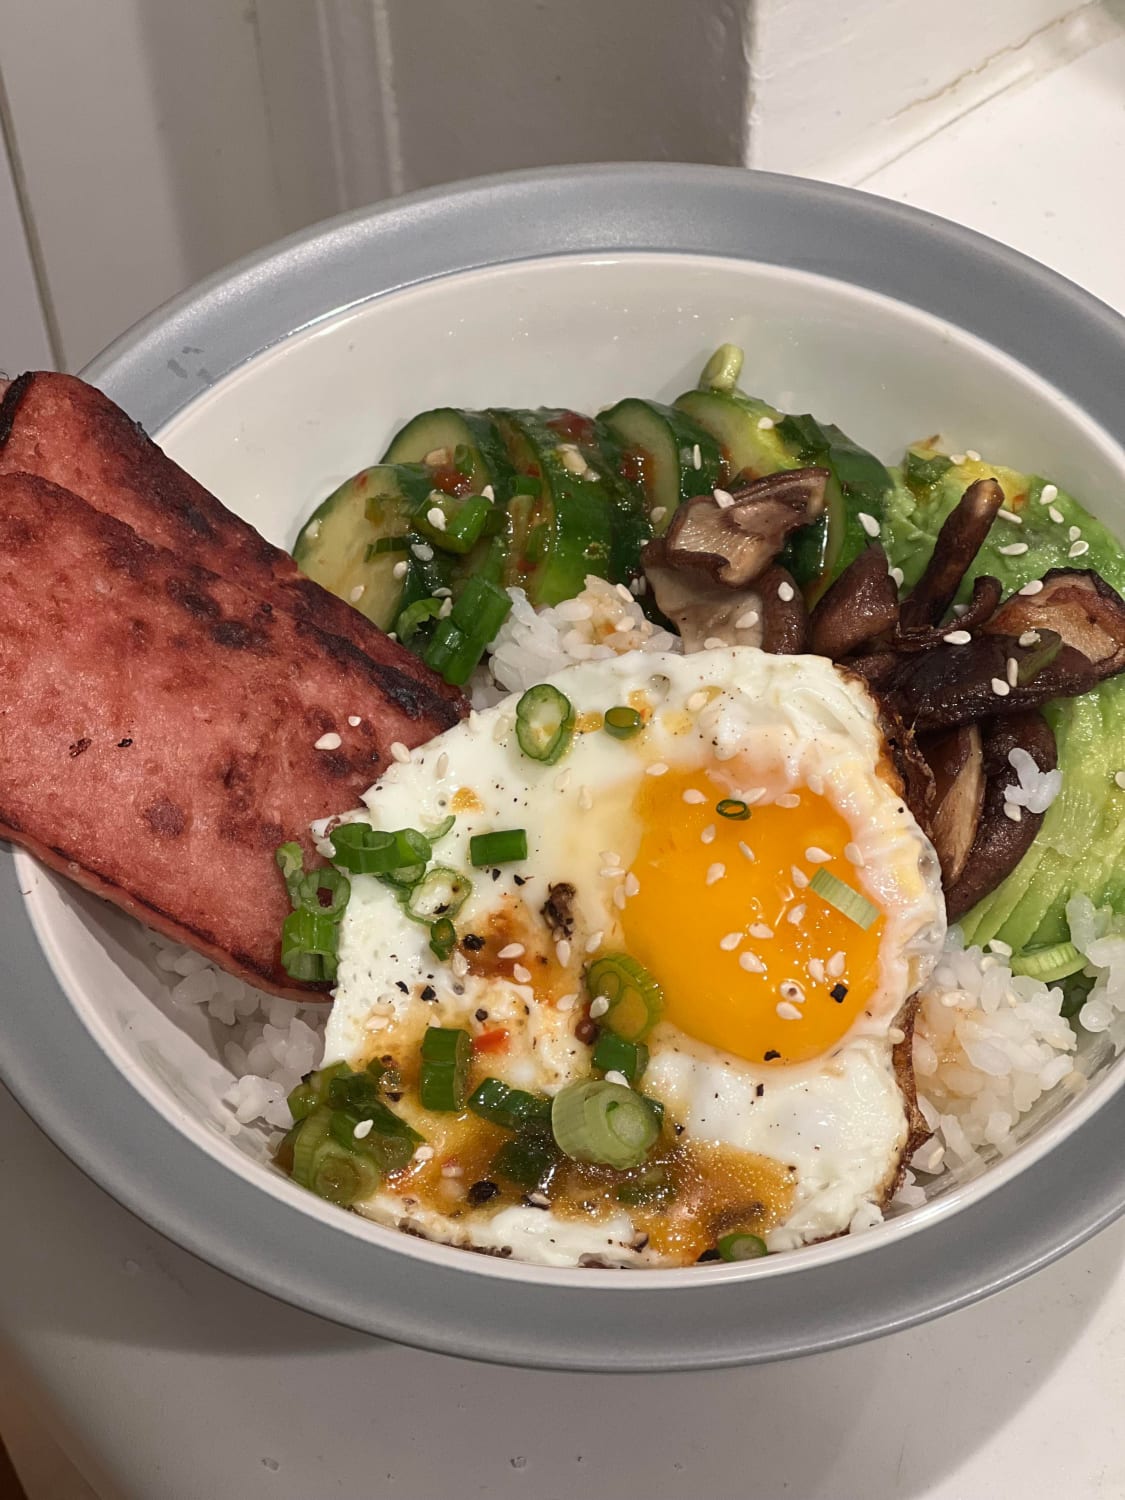 Breakfast(?) for dinner. Sushi Rice, cucumber salad, shiitake, avocado, spam, and a fried egg.